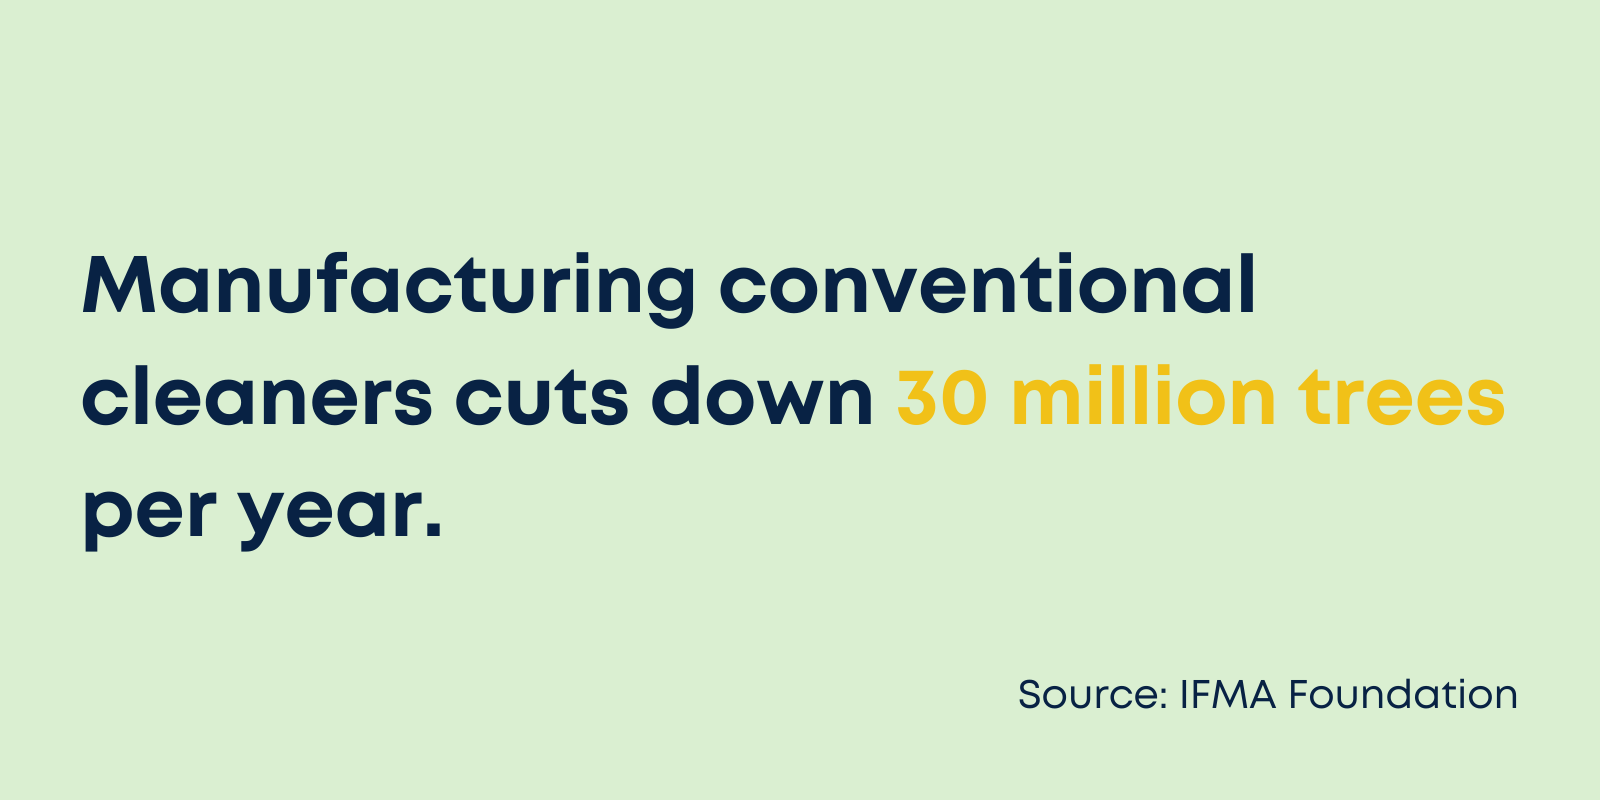 Manufacturing conventional cleaners cuts down 30 million trees per year.